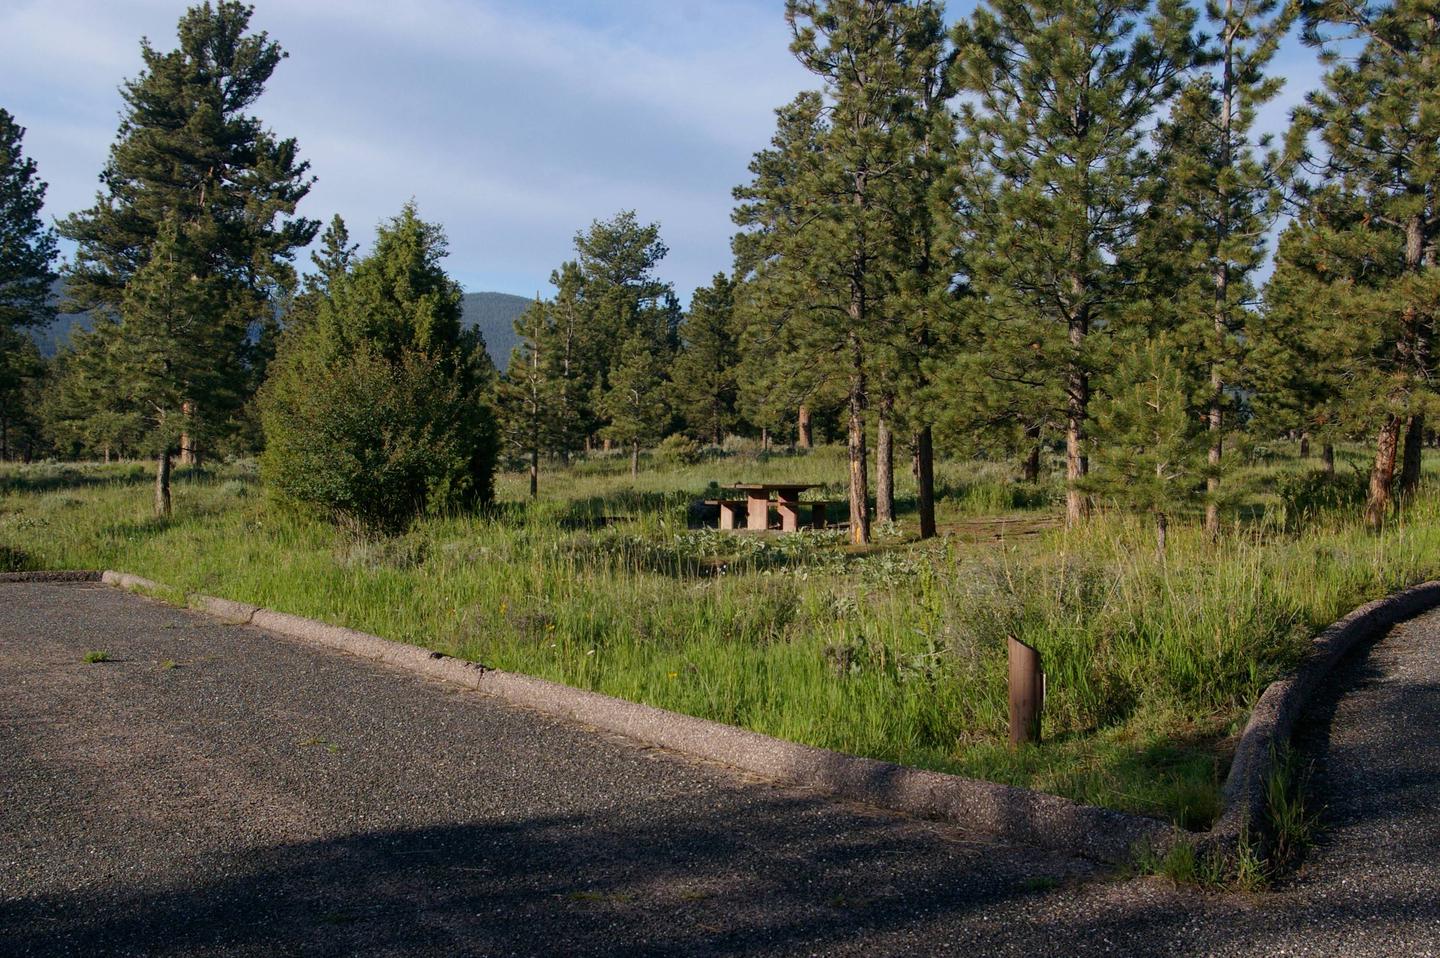 This site has a picnic table in a grassy area surrounded by conifers. Canyon Rim Campground